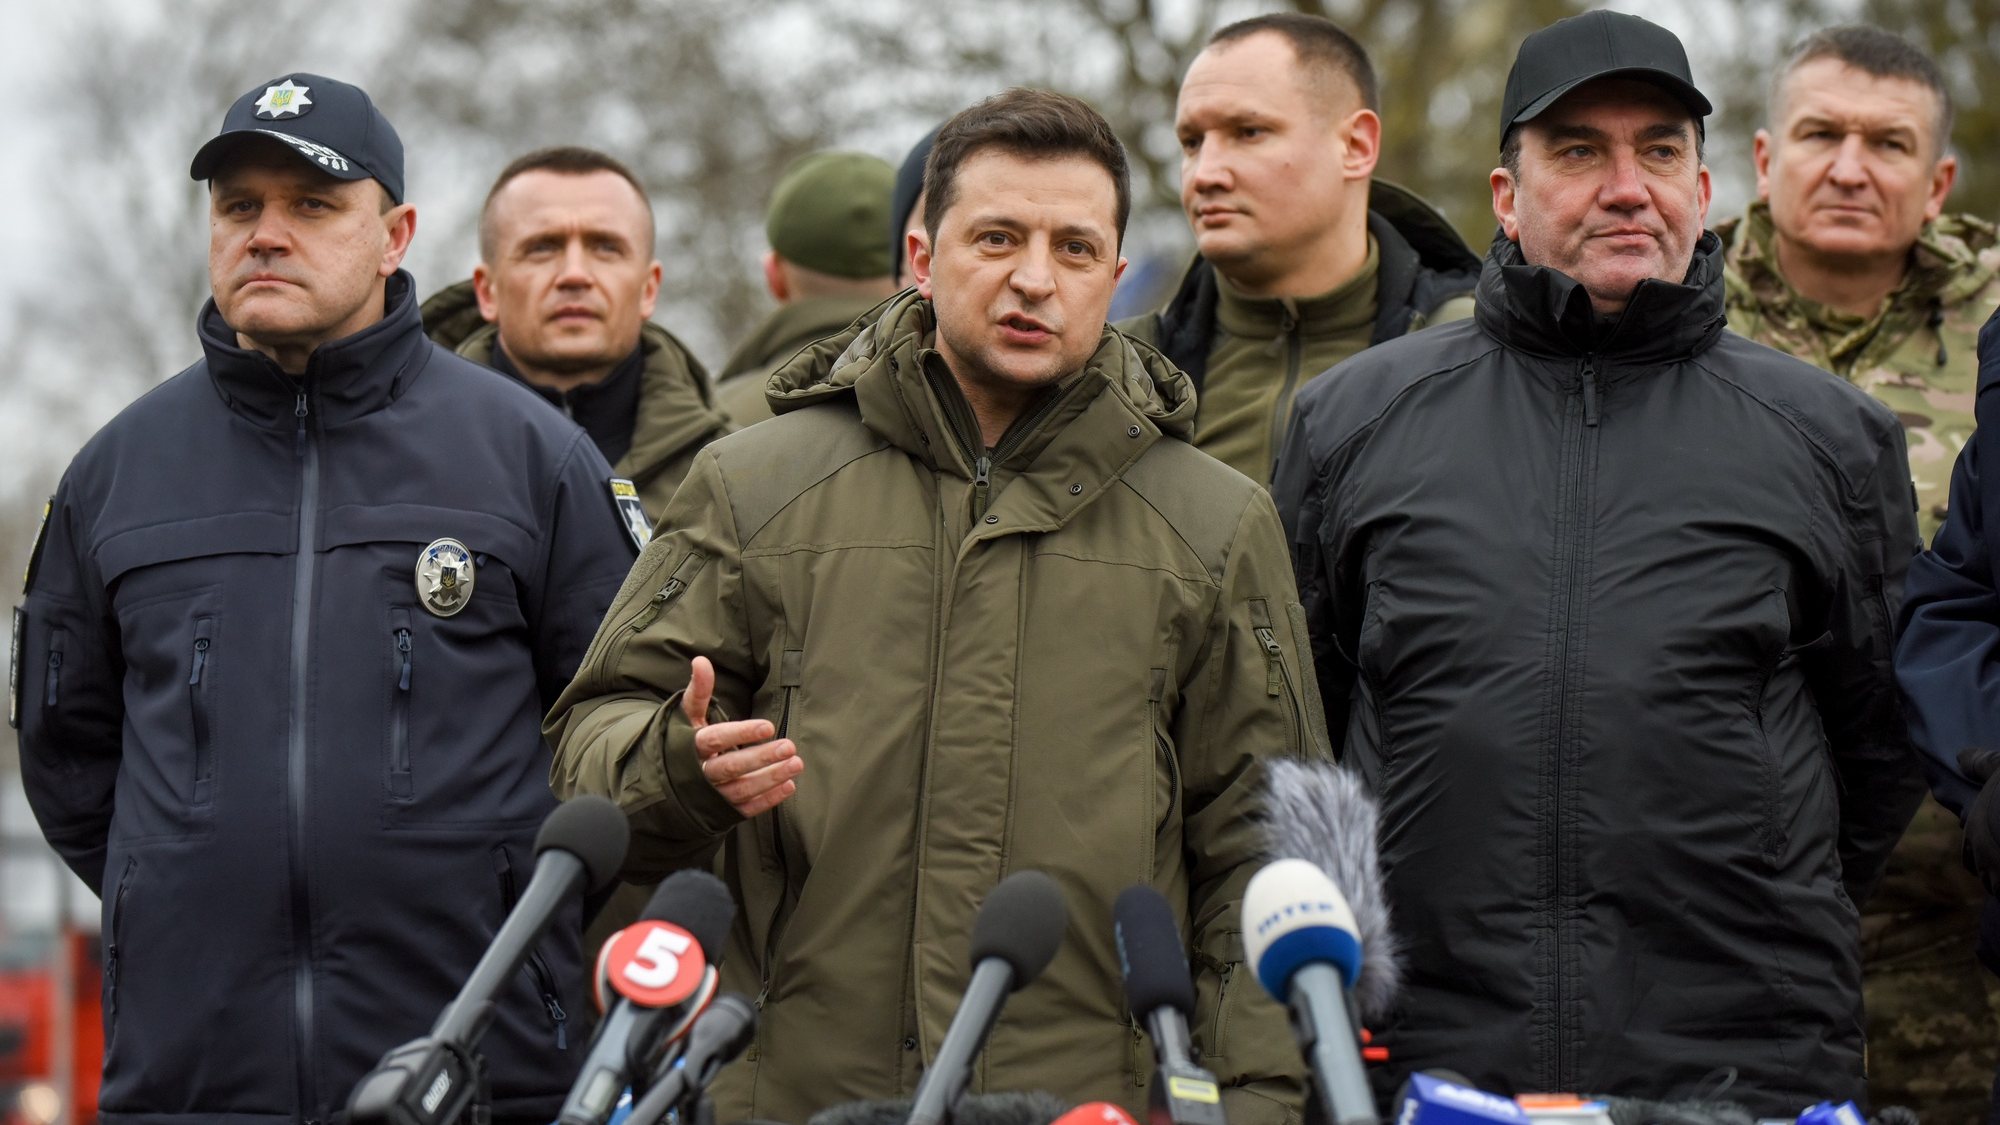 epa09750316 Ukrainian President Volodymyr Zelensky (C) attends an exercises near the Kalanchak village of Skadovsk district of Kherson area, South Ukraine, 12 February 2022 amid escalation on the Ukraine-Russian border. The special tactical training exercises for timely and effective response to situation with destabilizing factors were conducted in Kherson region, which are located critically close to the administrative border with Crimea peninsula annexed by Russia in 2014. More than thousand law enforcement officers (police, National Guard, State Emergency Service, Border Guard service, State migration Service and so on) special equipment, including a helicopter group were involved in the exercises.  EPA/OLEG PETRASYUK